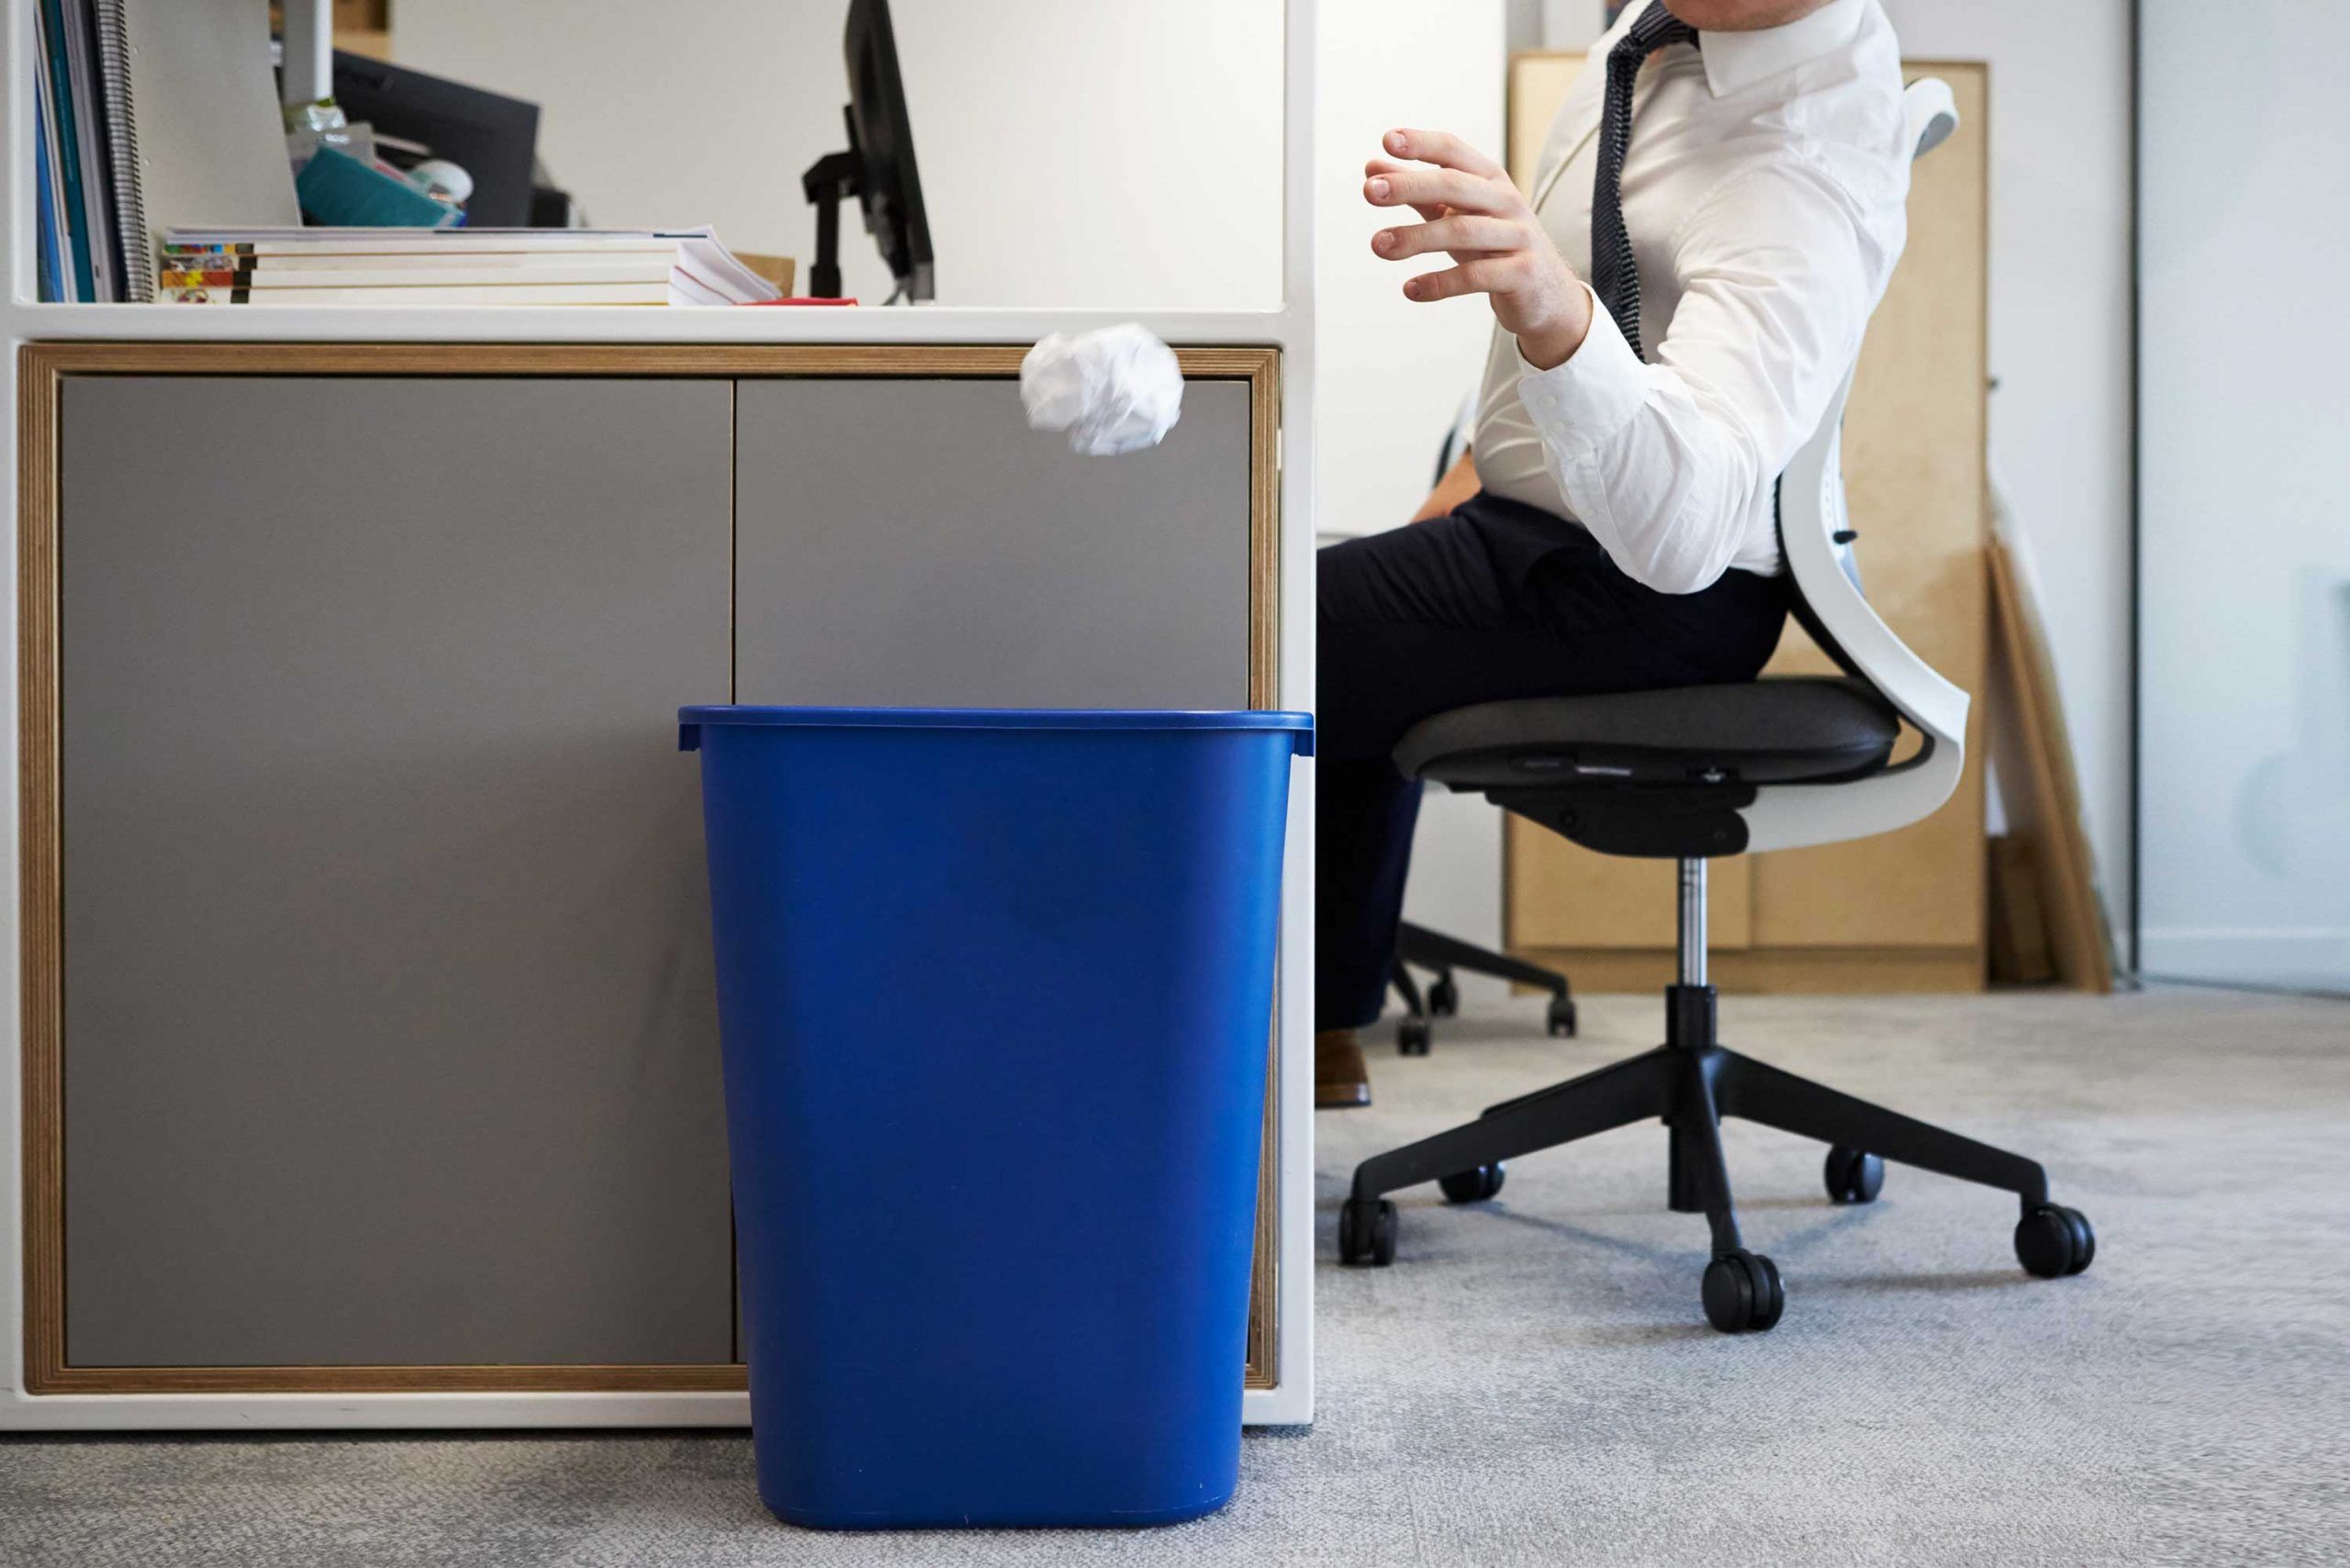 Employee Throwing Away Recycling in Office by Recycling Trash Systems